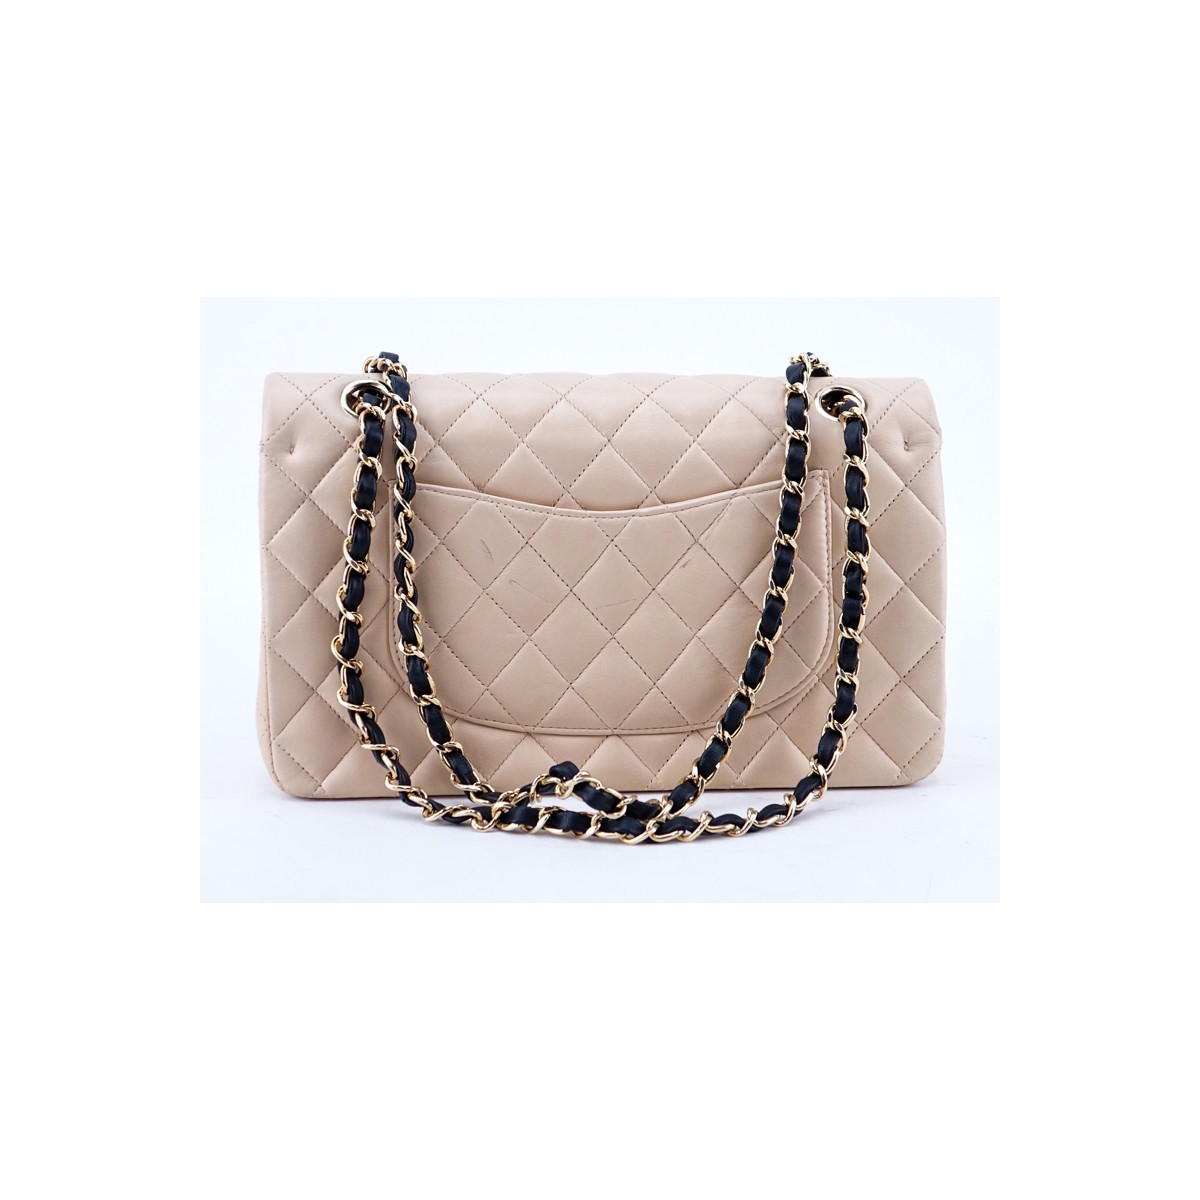 Chanel Light Beige Quilted Leather Bicolor Classic Double Flap 26 Bag. Gold tone hardware, beige interior with zippered and patch pockets, chain interlaced with leather.